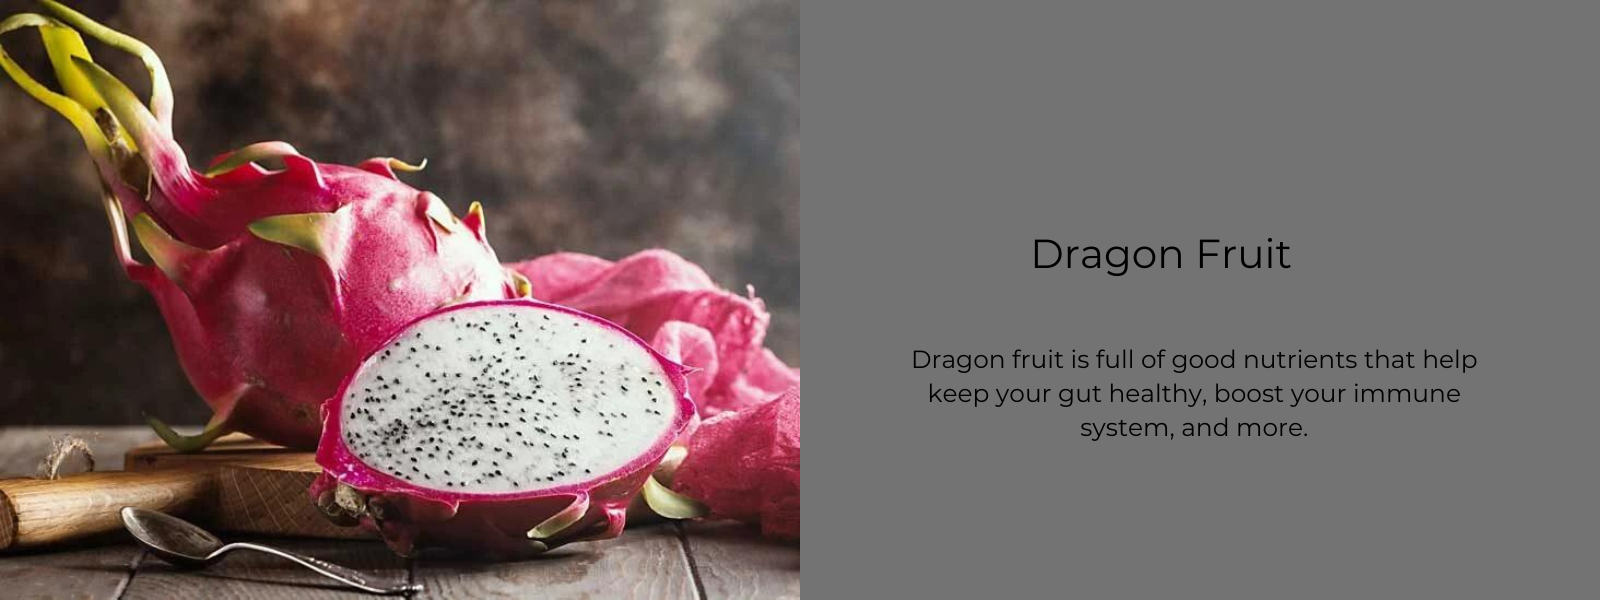 Dragon Fruit - Health Benefits, Uses and Important Facts